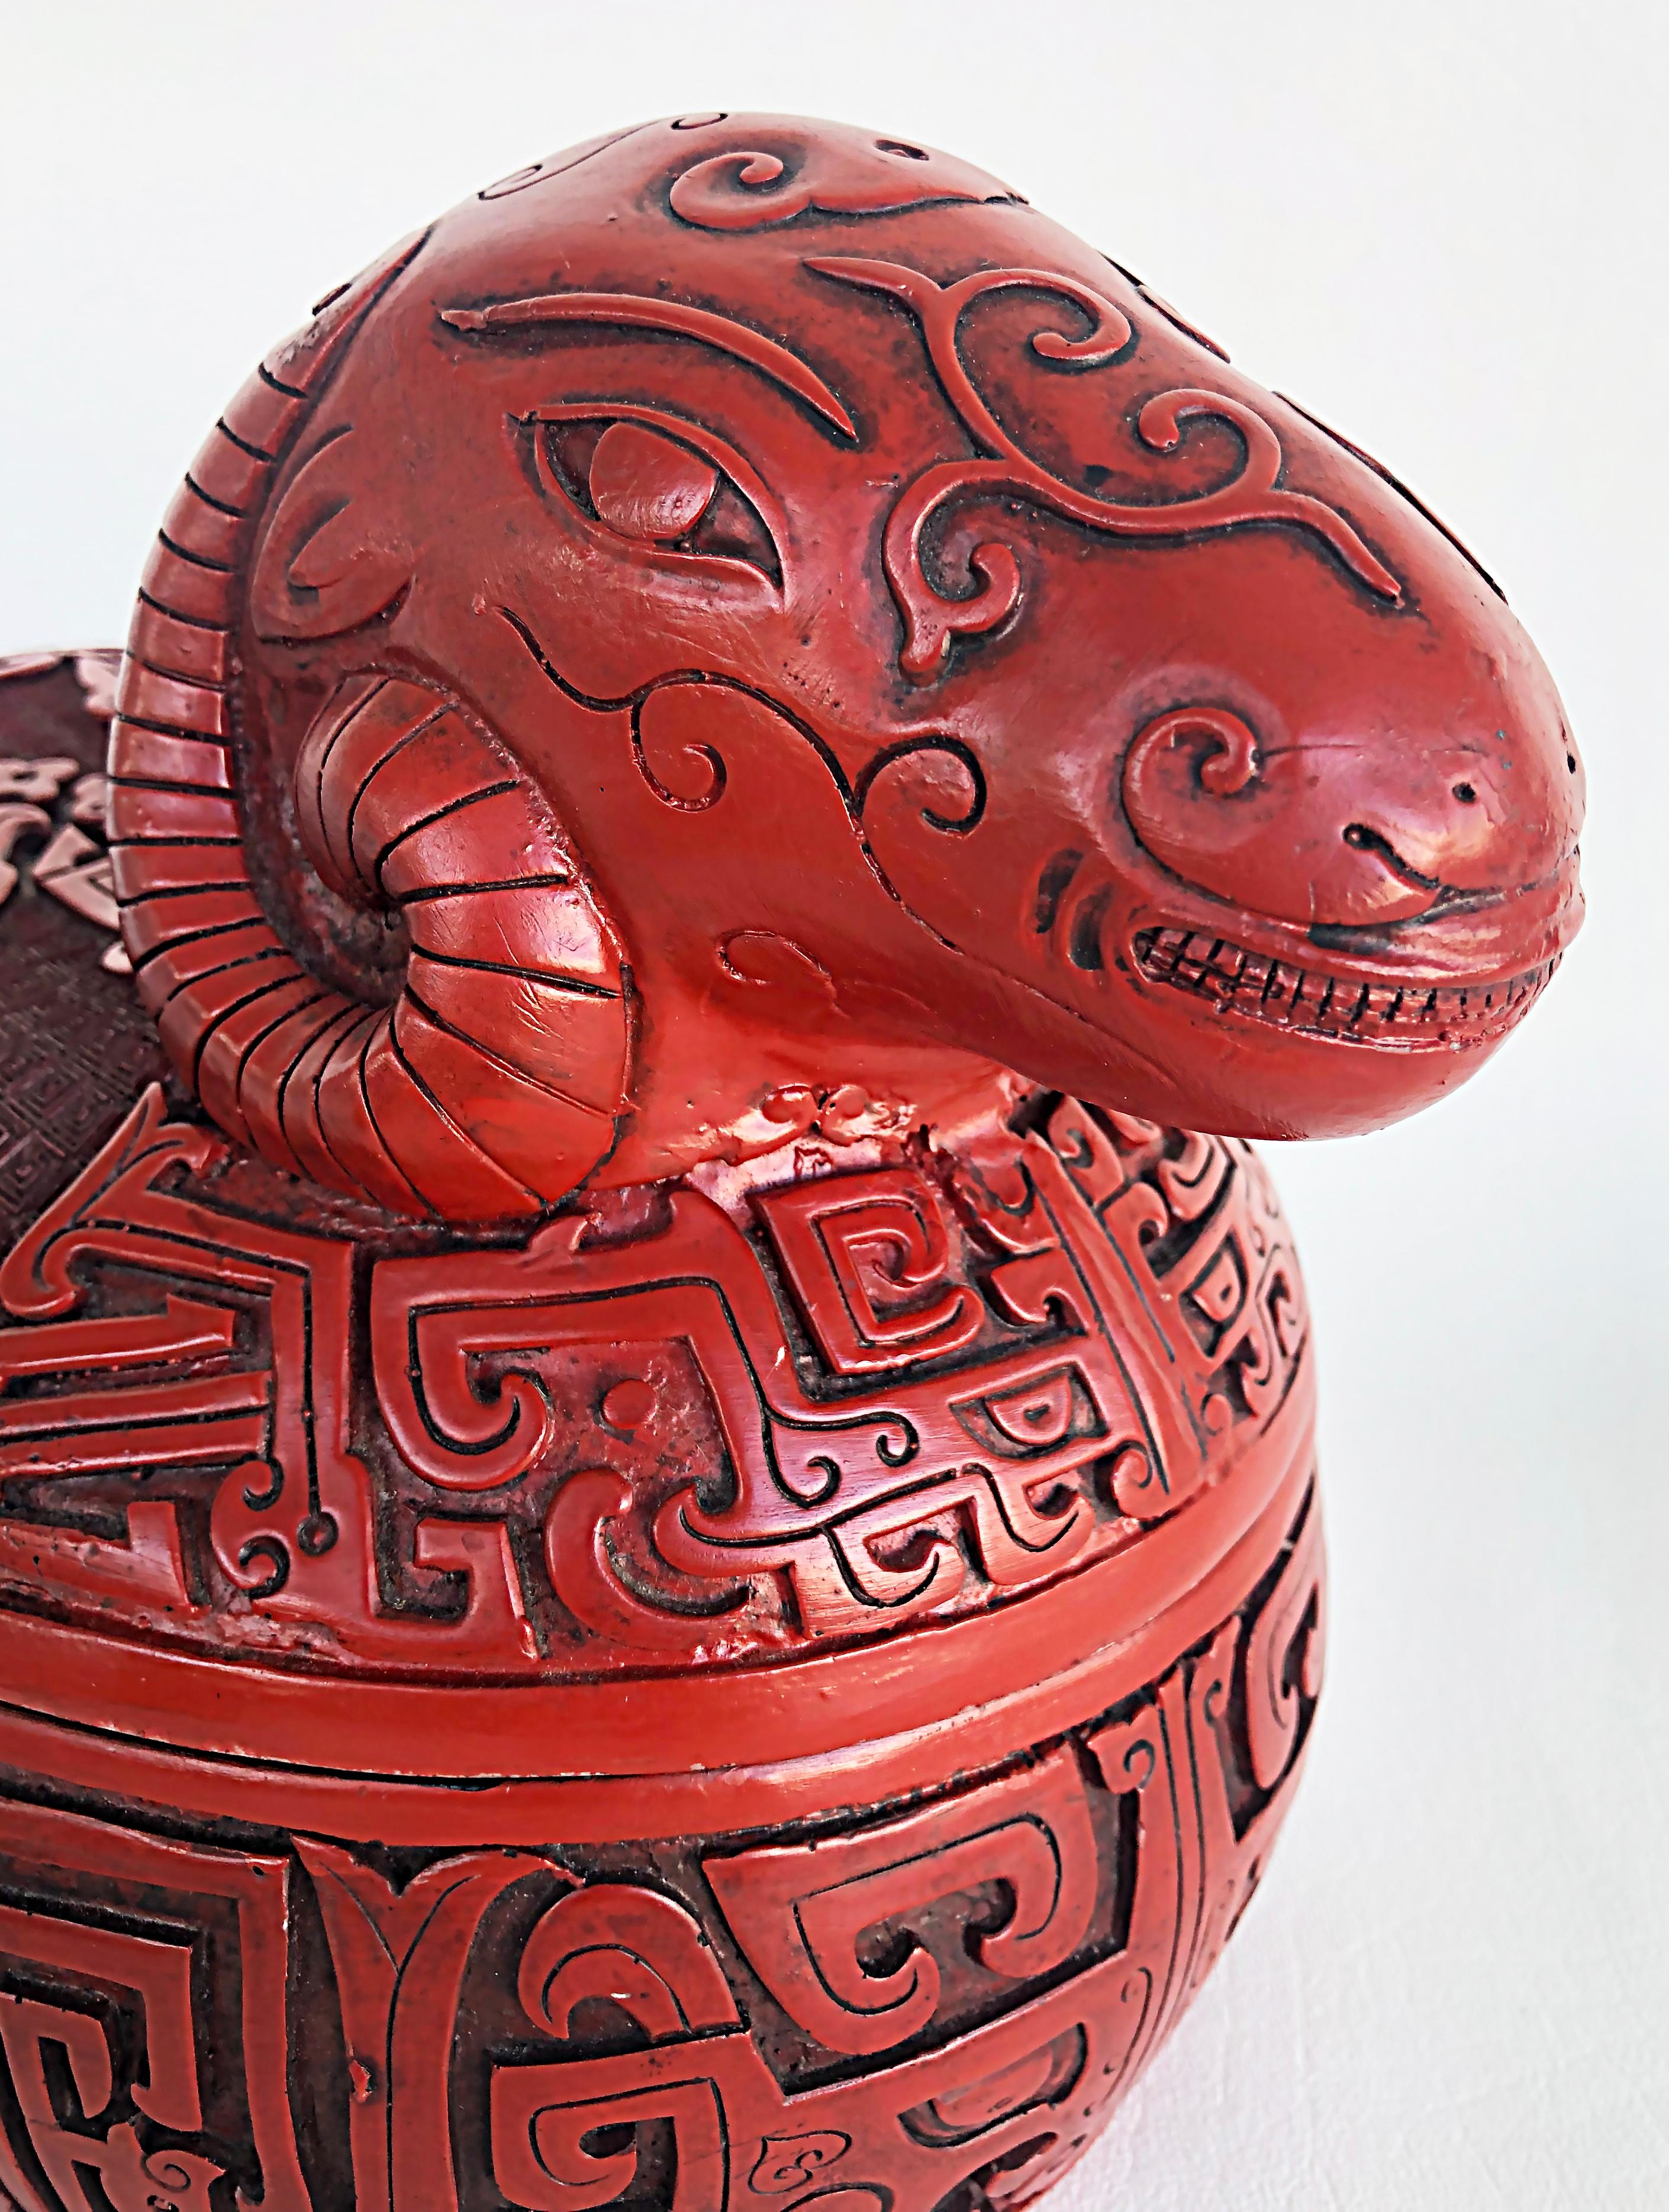 Chinese cinnabar carved ram covered box with lacquered interior

Offered for sale is a box created in the form of a ram with a lacquered interior. This vintage cinnabar box is carved in the archaic style from the Republic Period 1912-1949. 

